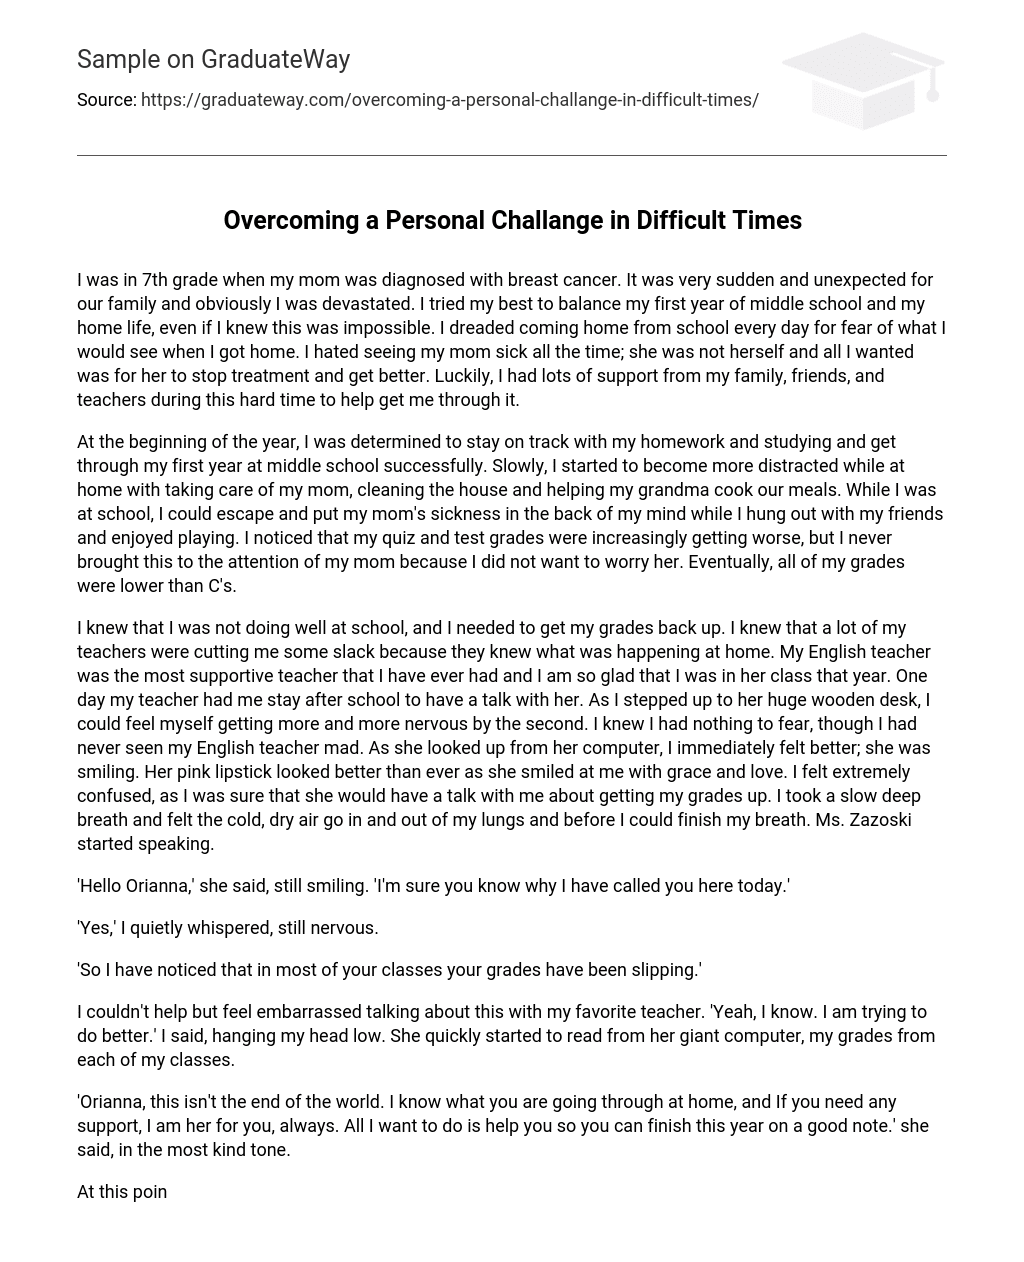 Overcoming a Personal Challange in Difficult Times